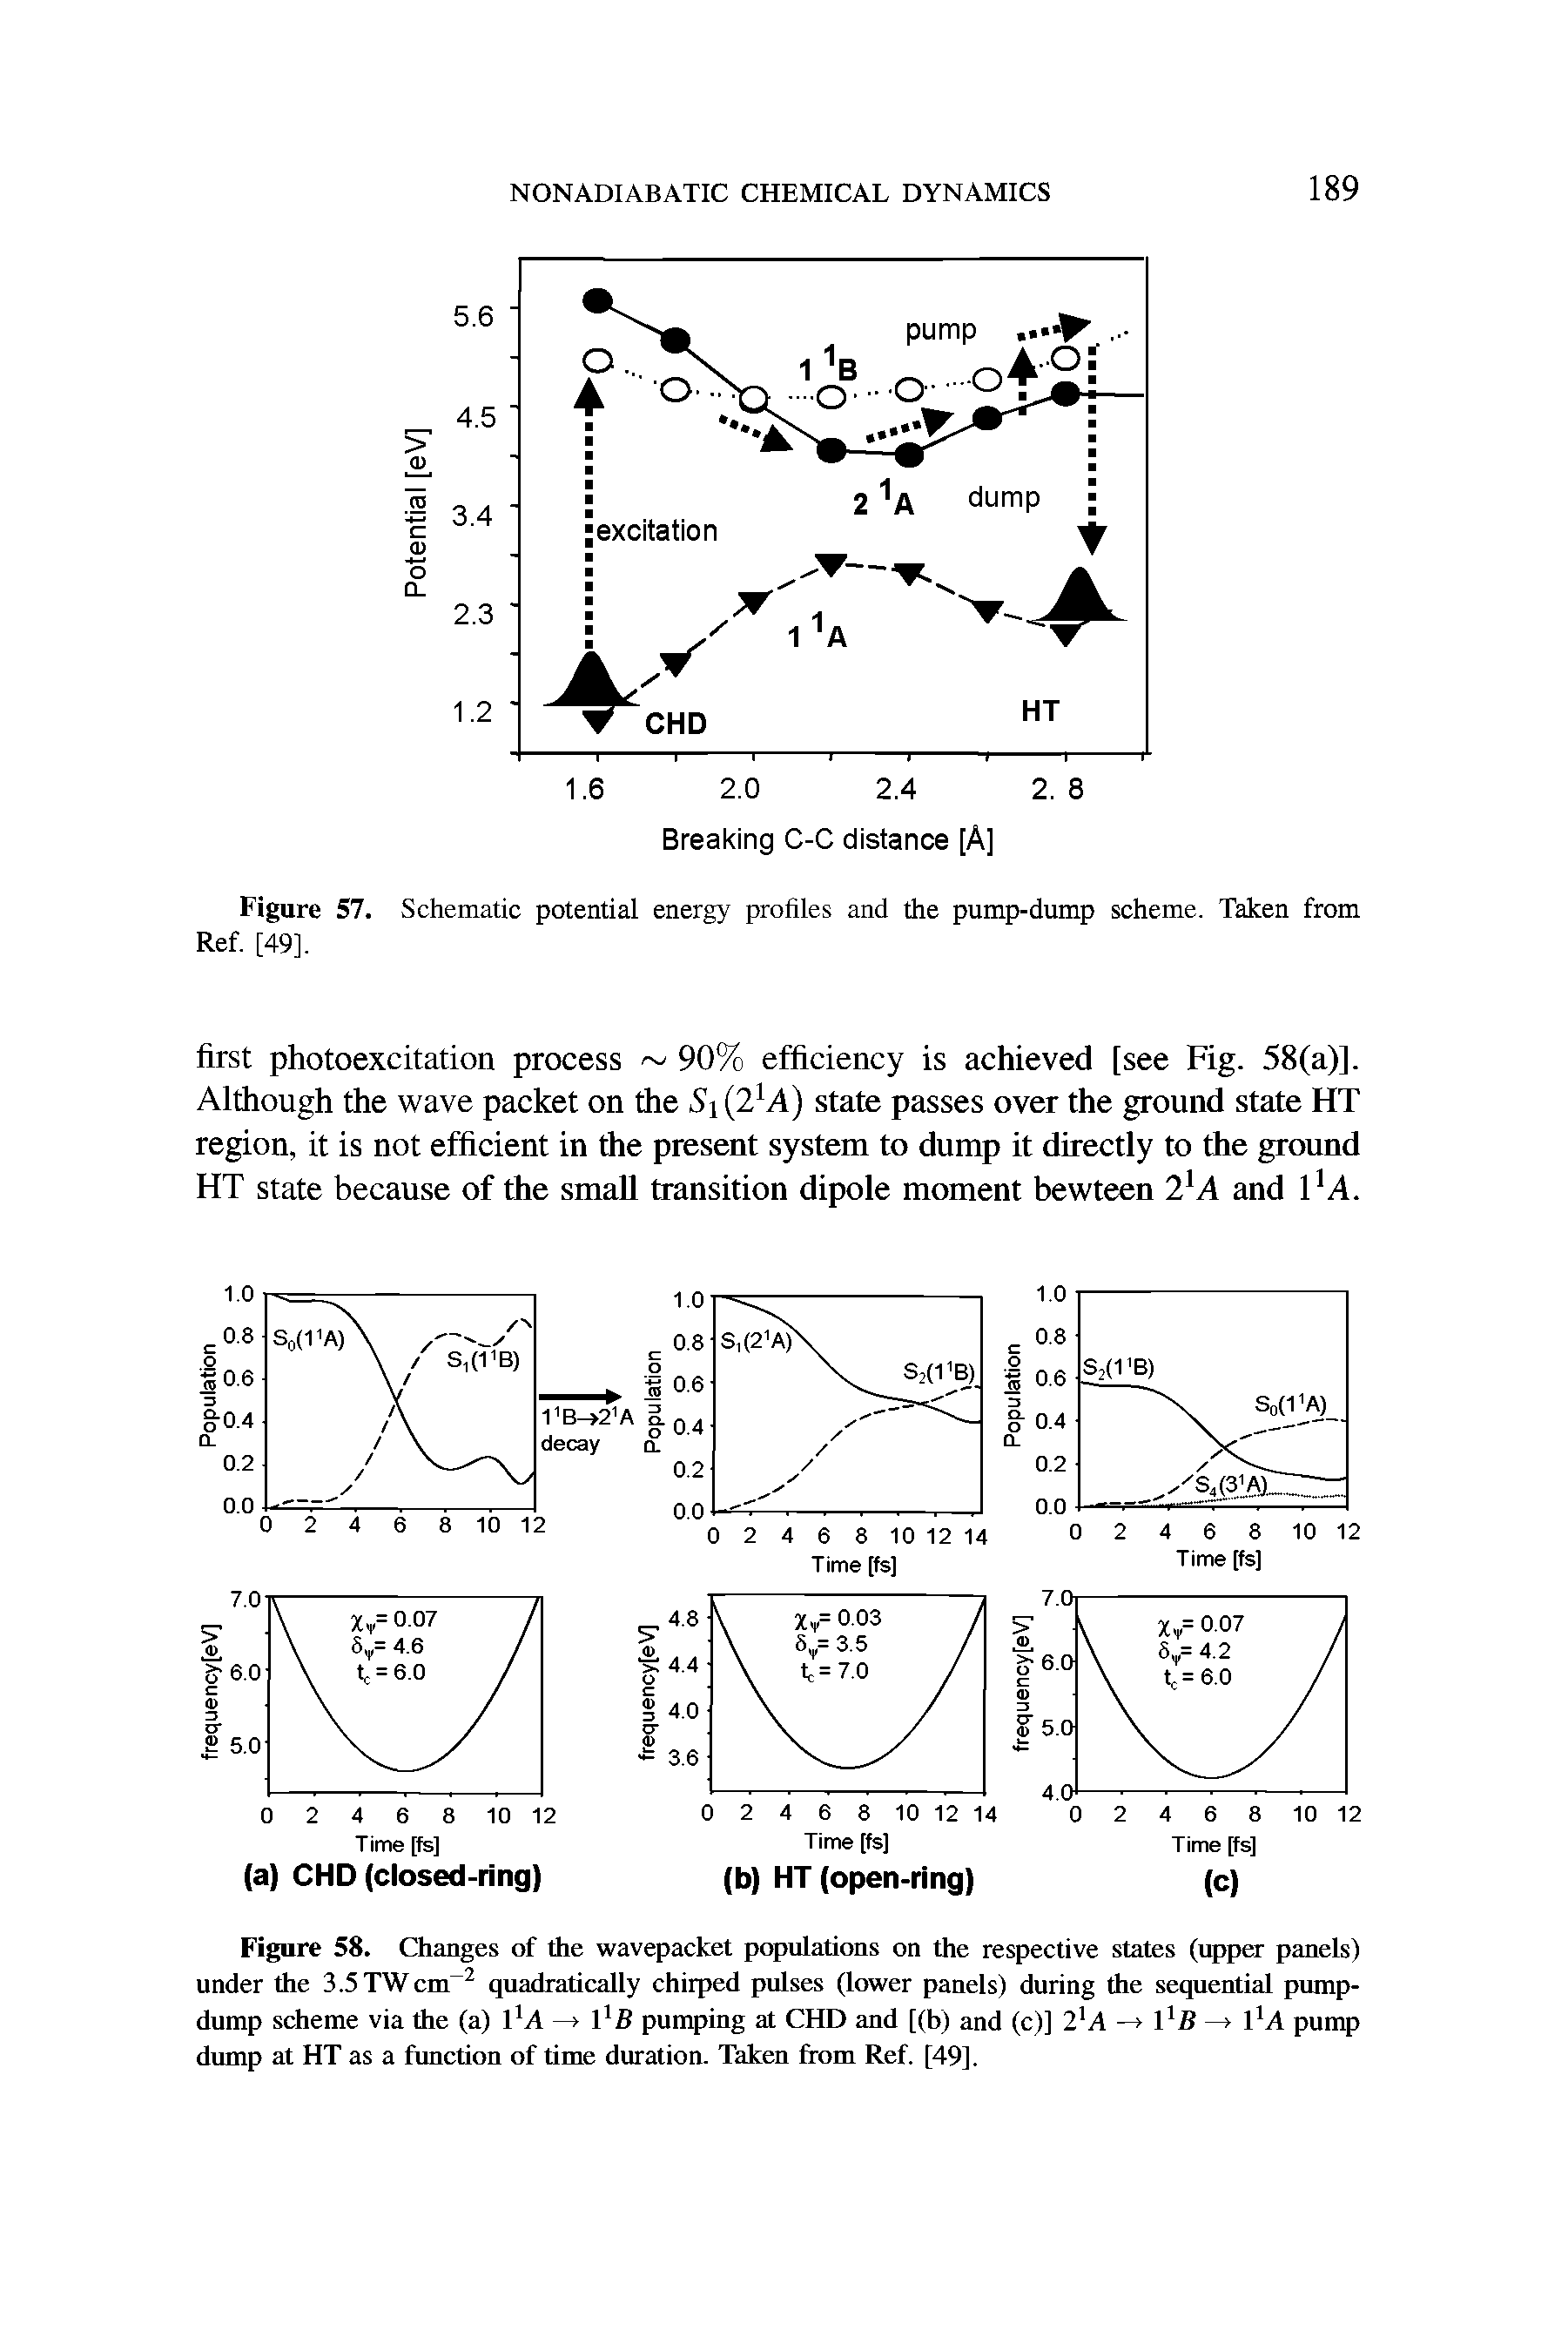 Figure 57. Schematic potential energy profiles and the pump-dump scheme. Taken from Ref. [49].